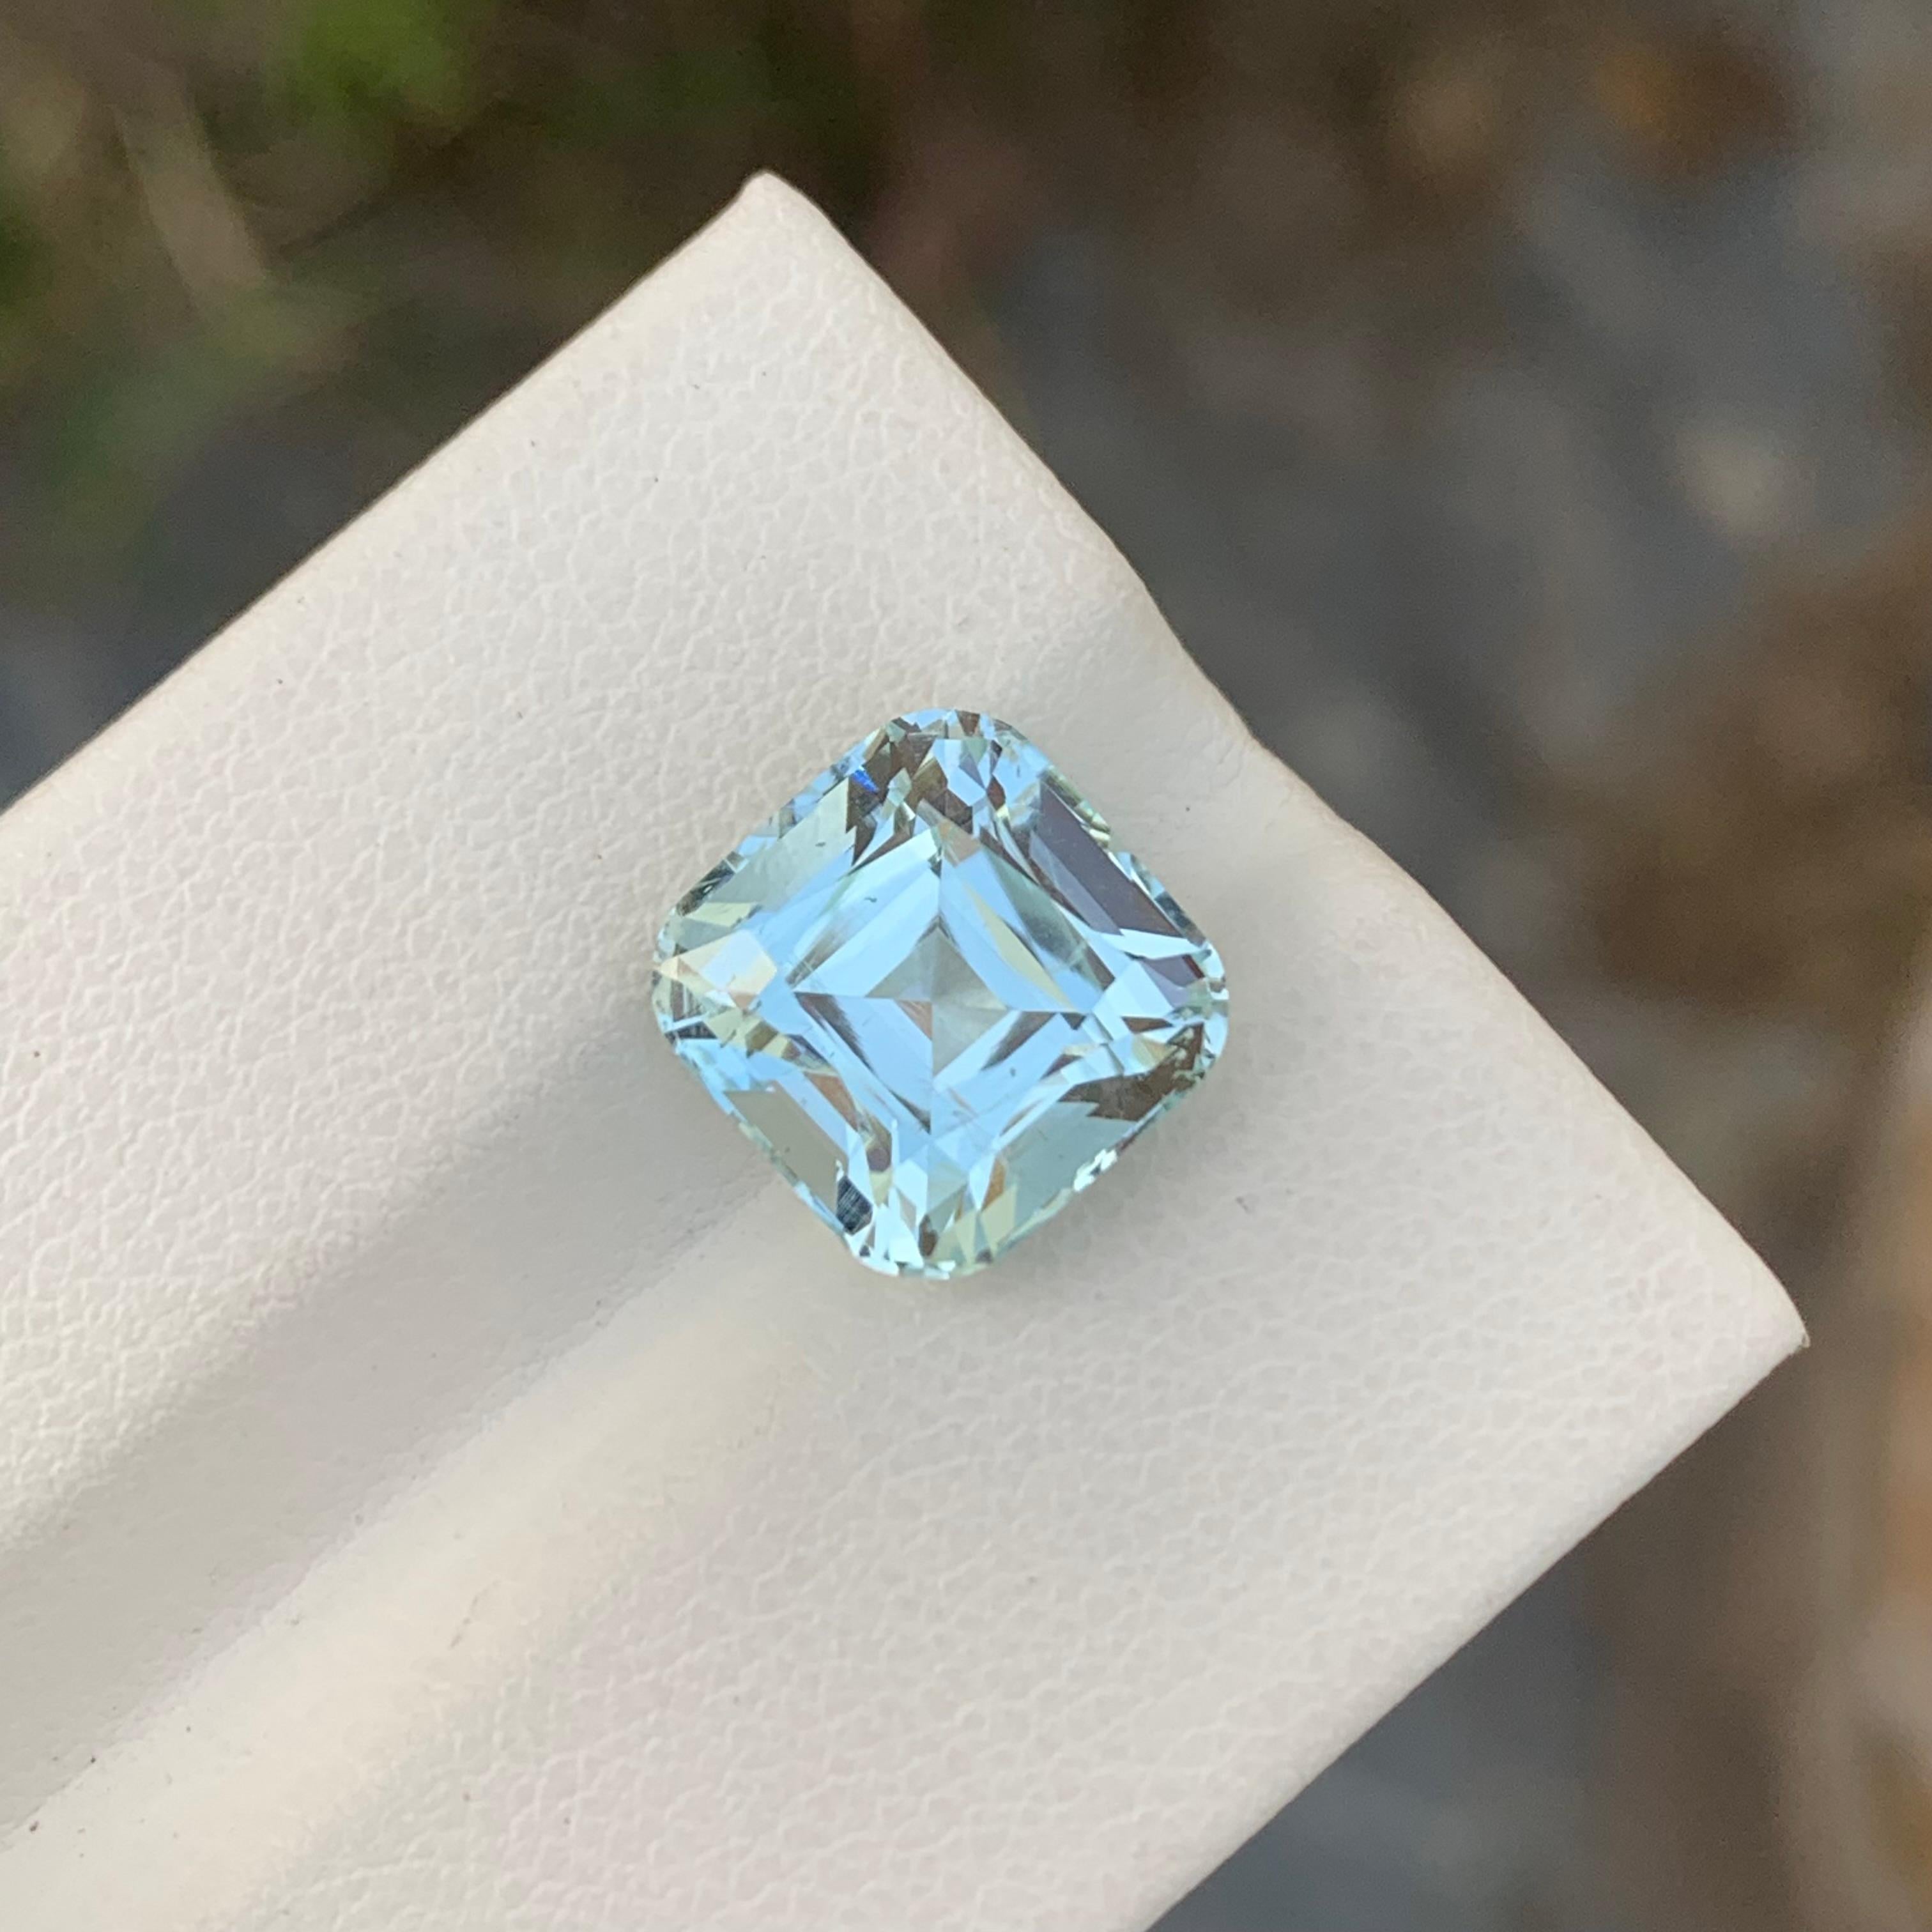 Loose Aquamarine
Weight: 5.70 Carat
Dimension: 10.1 x 10 x 8.2 Mm
Colour : Pale Blue
Origin: Shigar Valley, Pakistan
Treatment: Non
Certificate : On Demand
Shape: Square 

Aquamarine is a captivating gemstone known for its enchanting blue-green hues